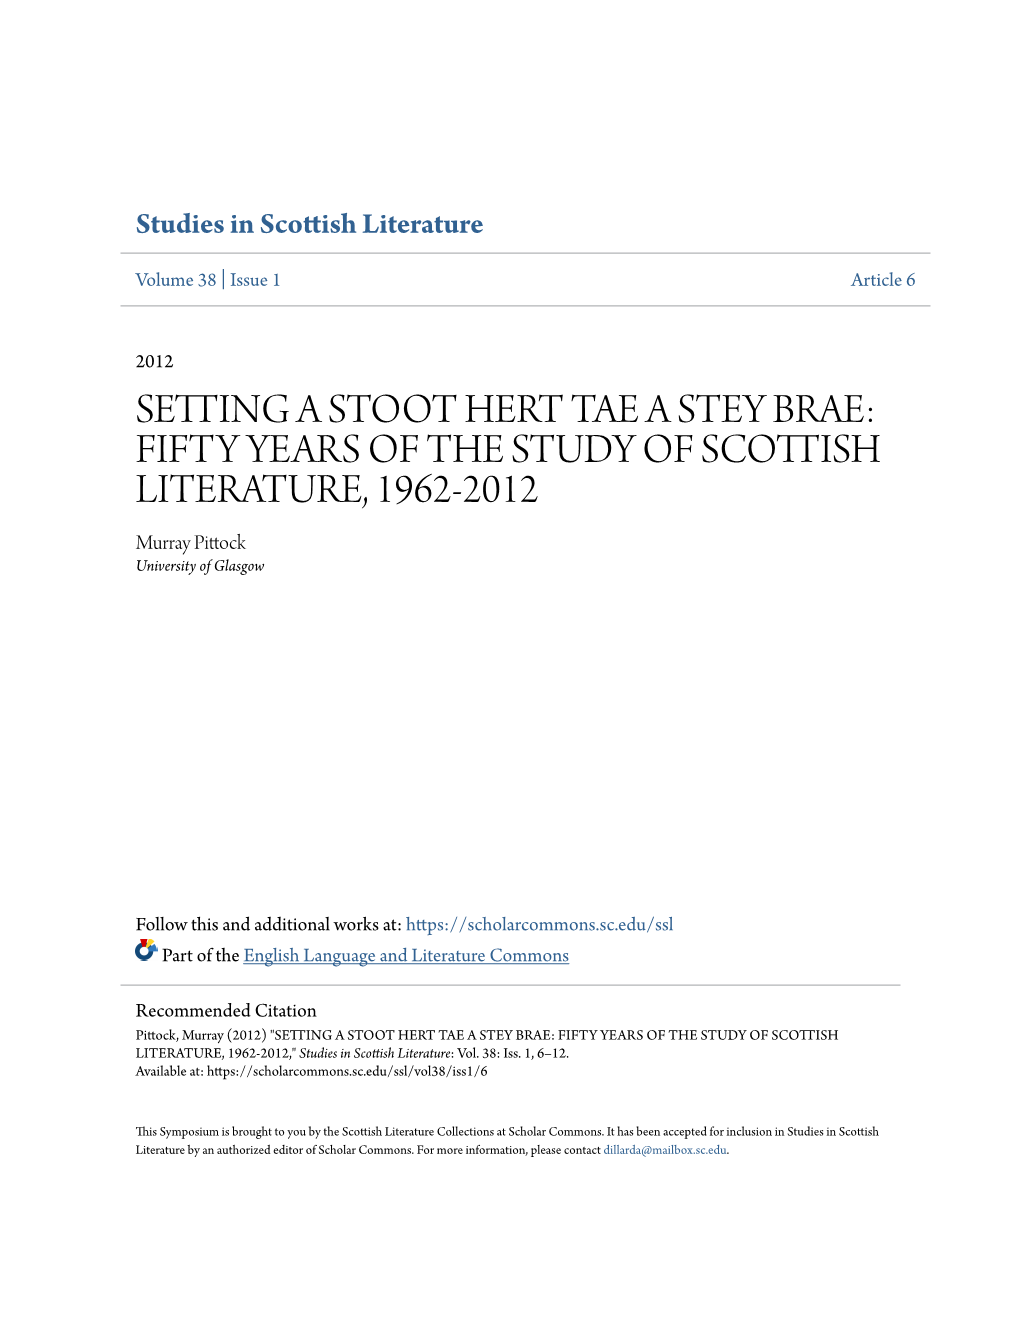 SETTING a STOOT HERT TAE a STEY BRAE: FIFTY YEARS of the STUDY of SCOTTISH LITERATURE, 1962-2012 Murray Pittock University of Glasgow